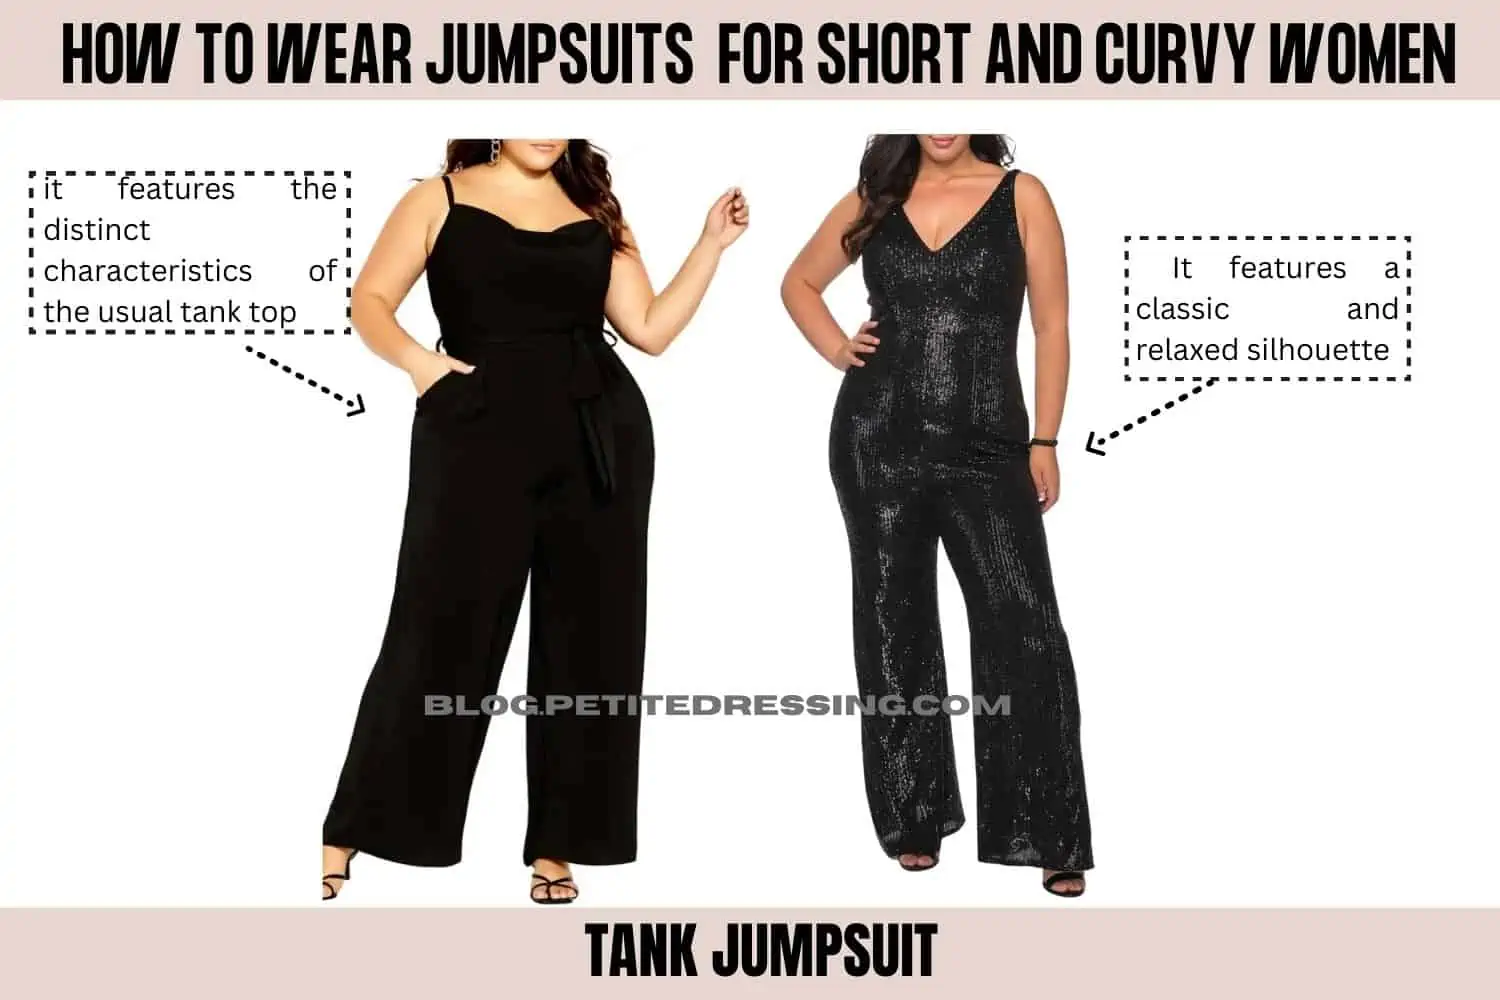 Work Trousers For Pear Shaped Body - Maridfashion